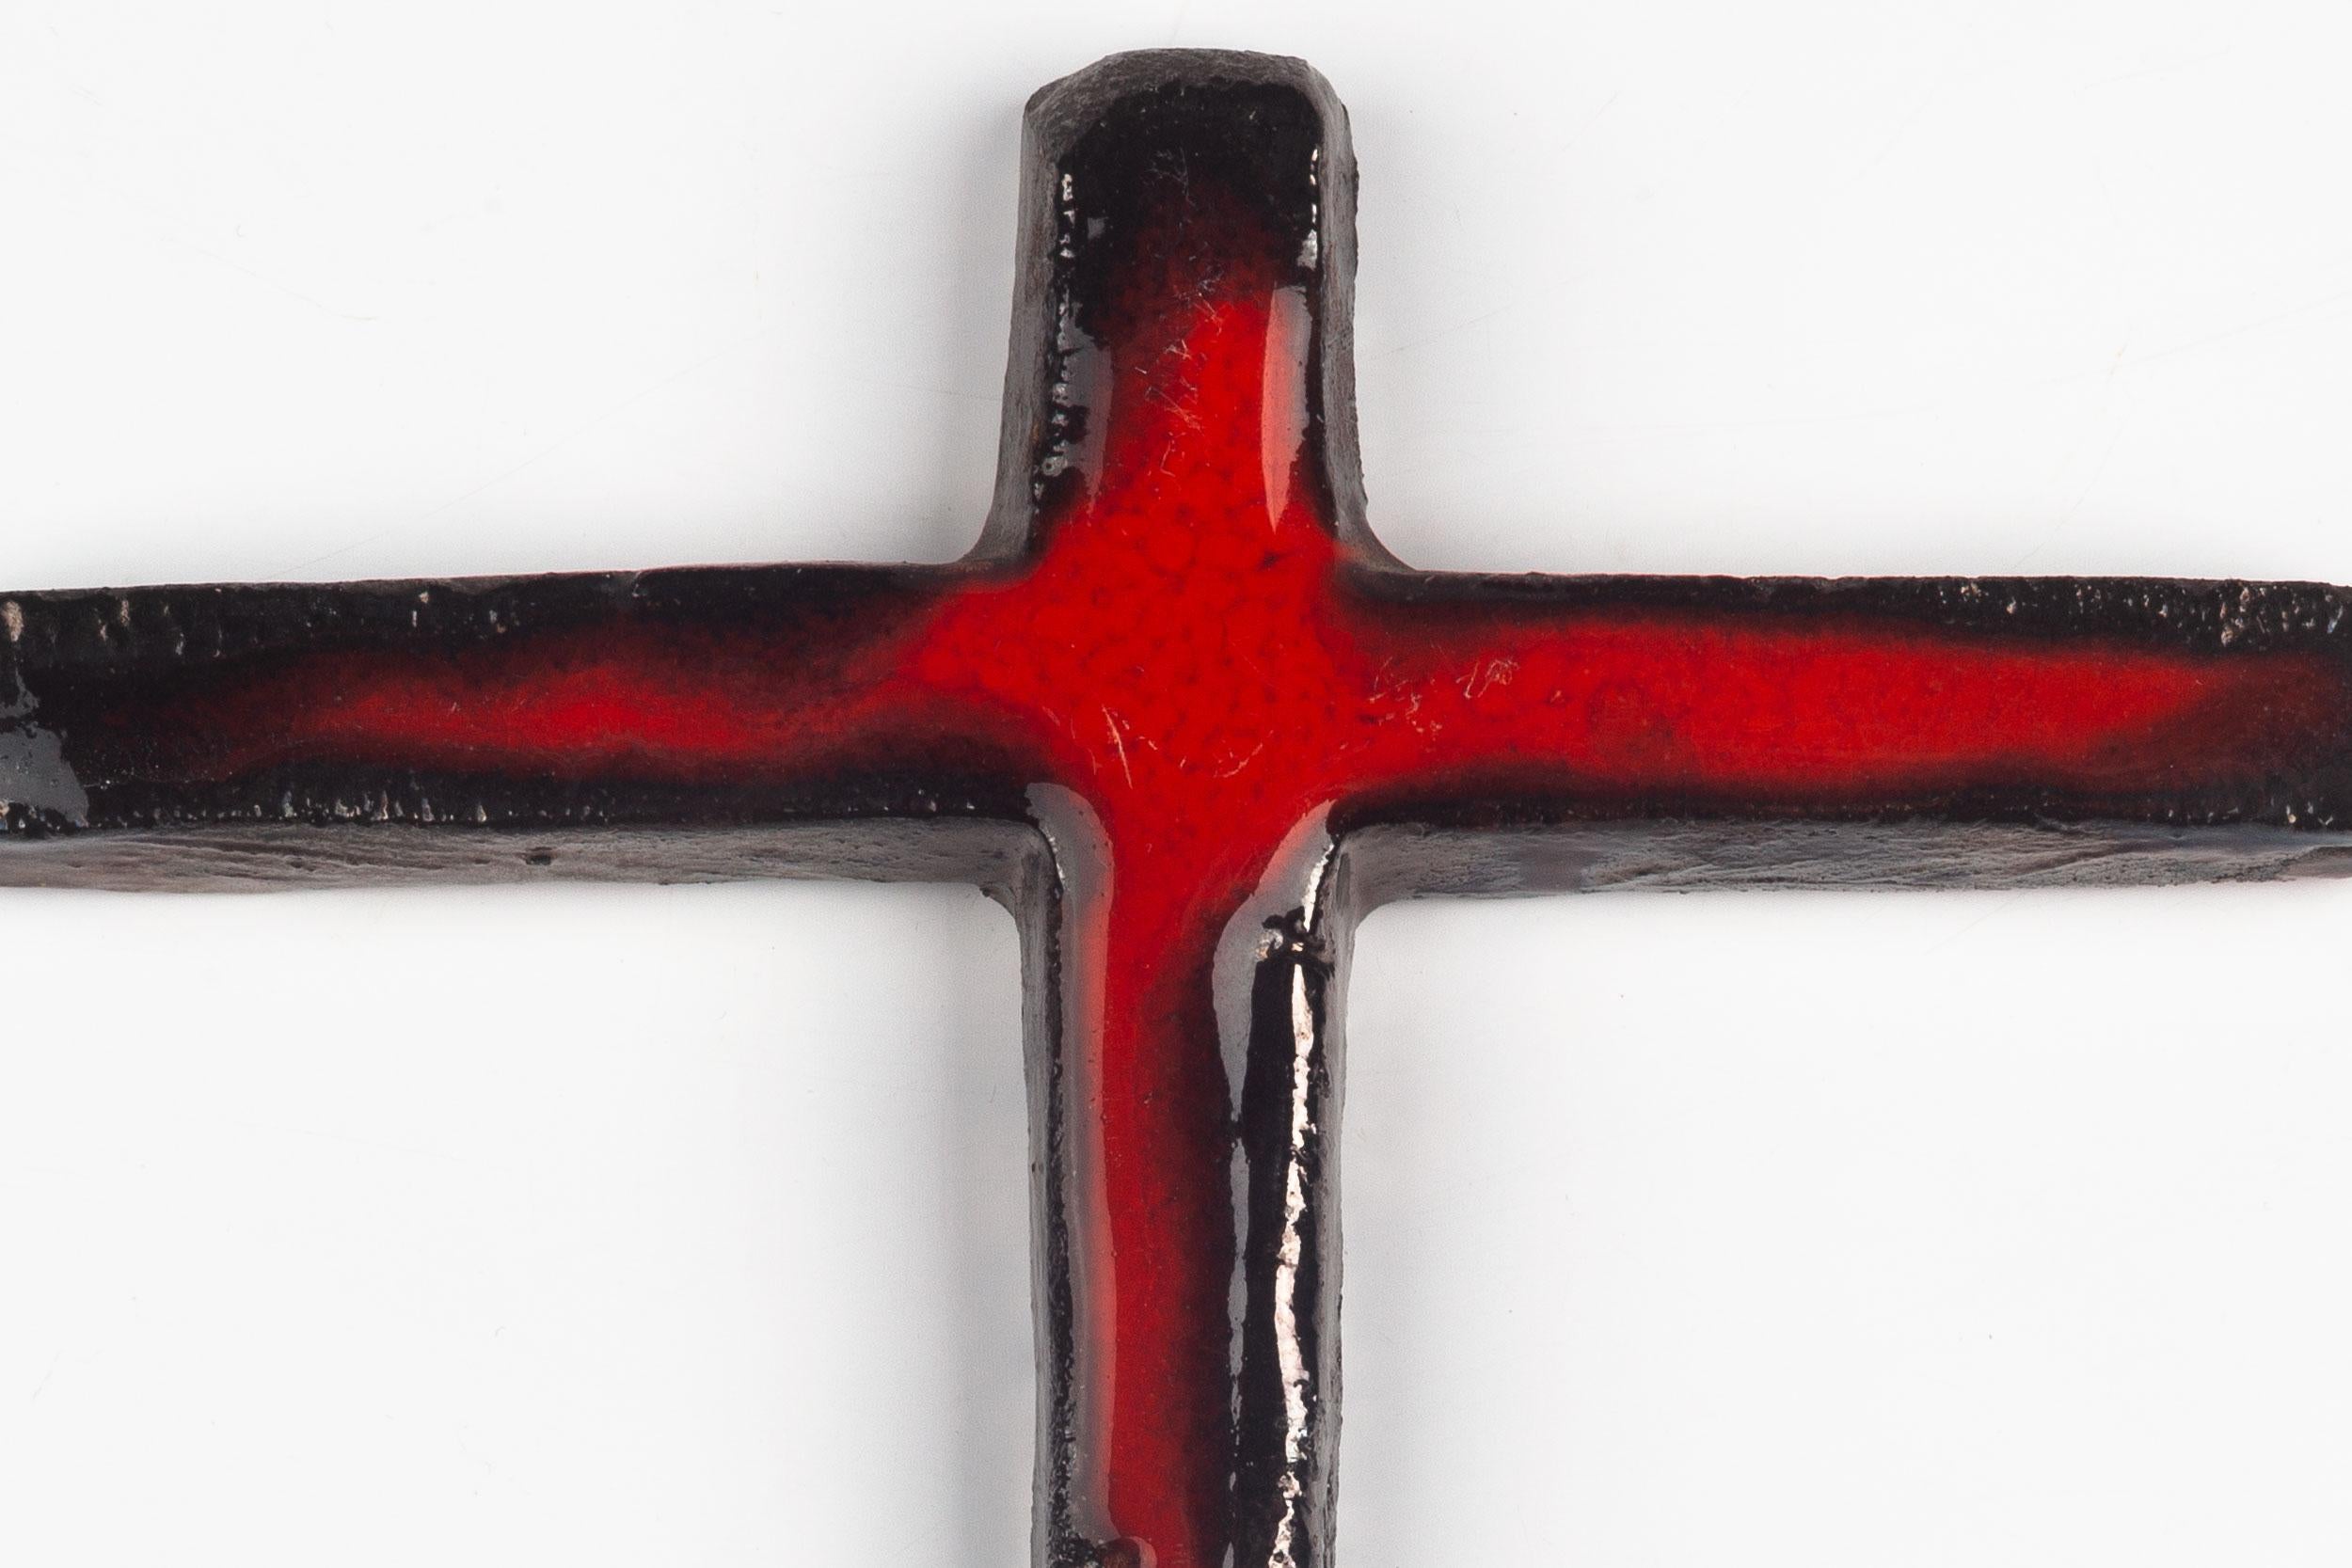 Mid-century European crucifix in ceramic with high gloss glaze and hand-painted in bright red and black. A one-of-a-kind, handcrafted piece that is part of a large collection of crosses made by artisan potters from the 1950s to 1970s. A unique